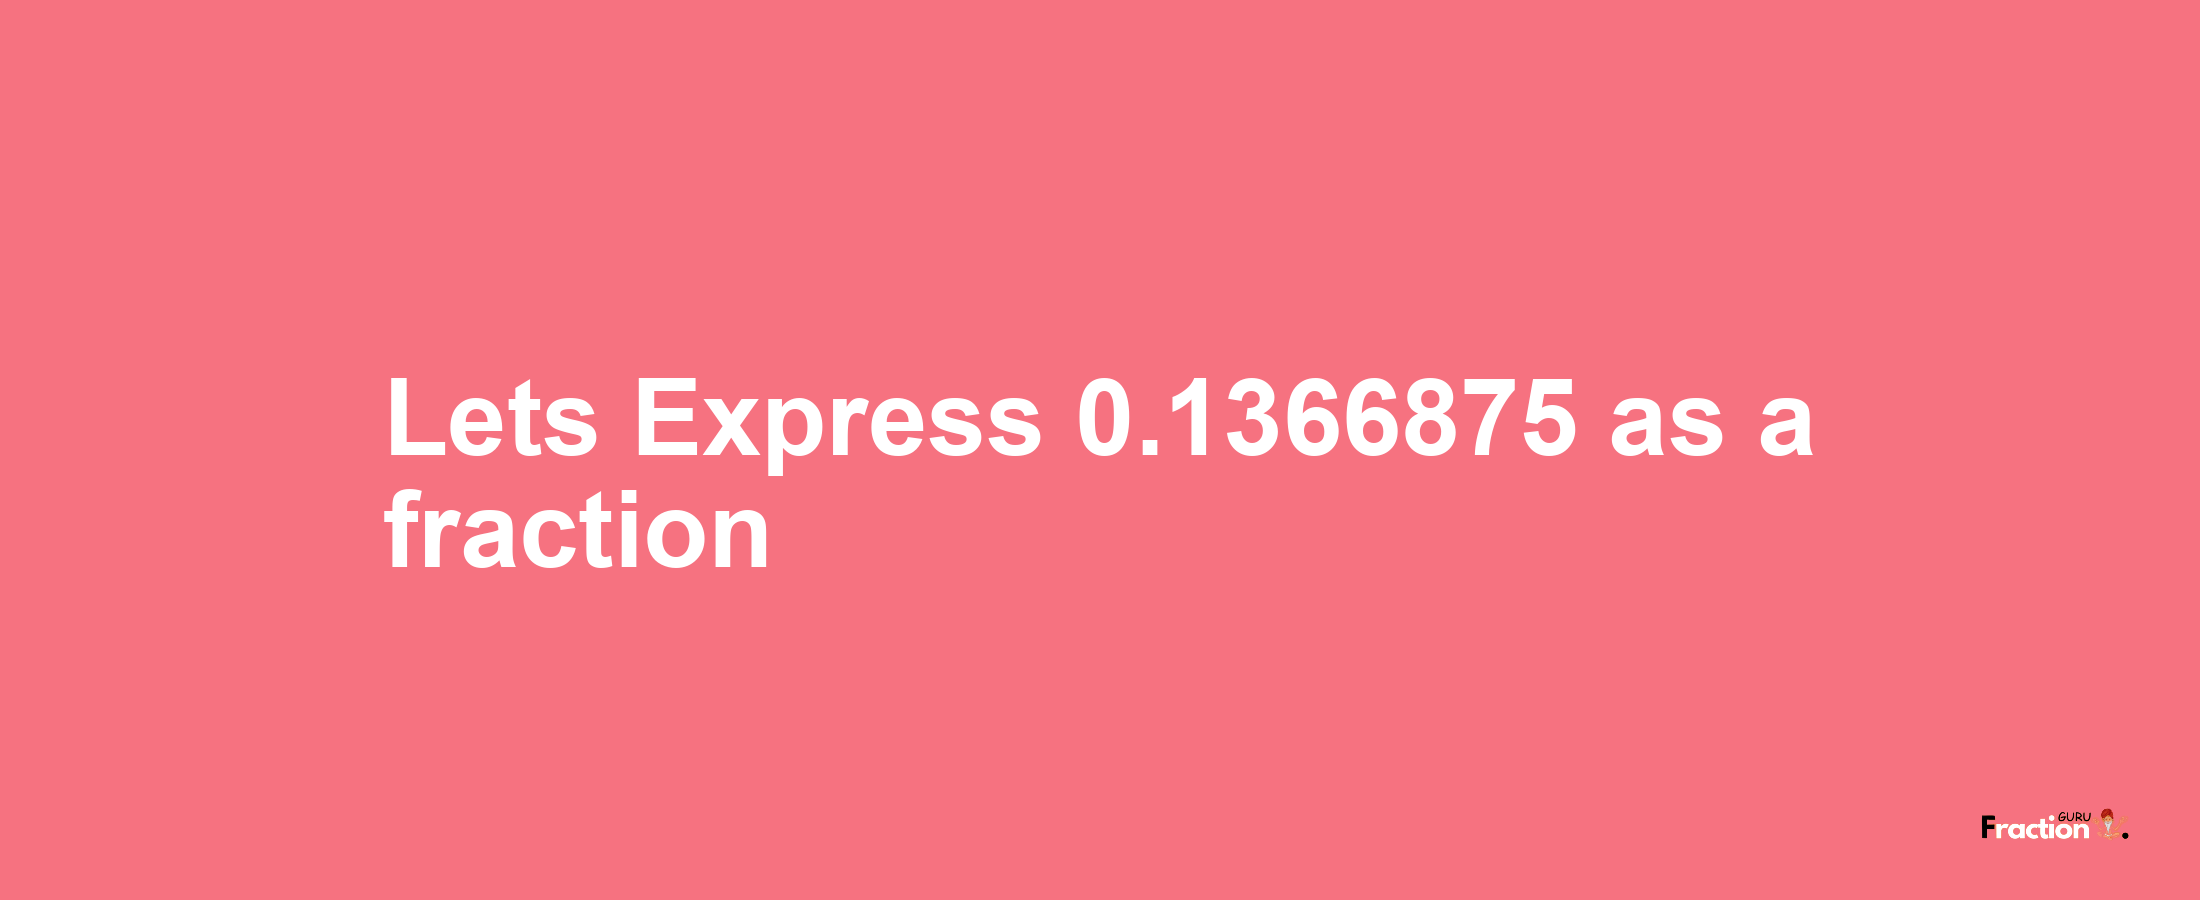 Lets Express 0.1366875 as afraction